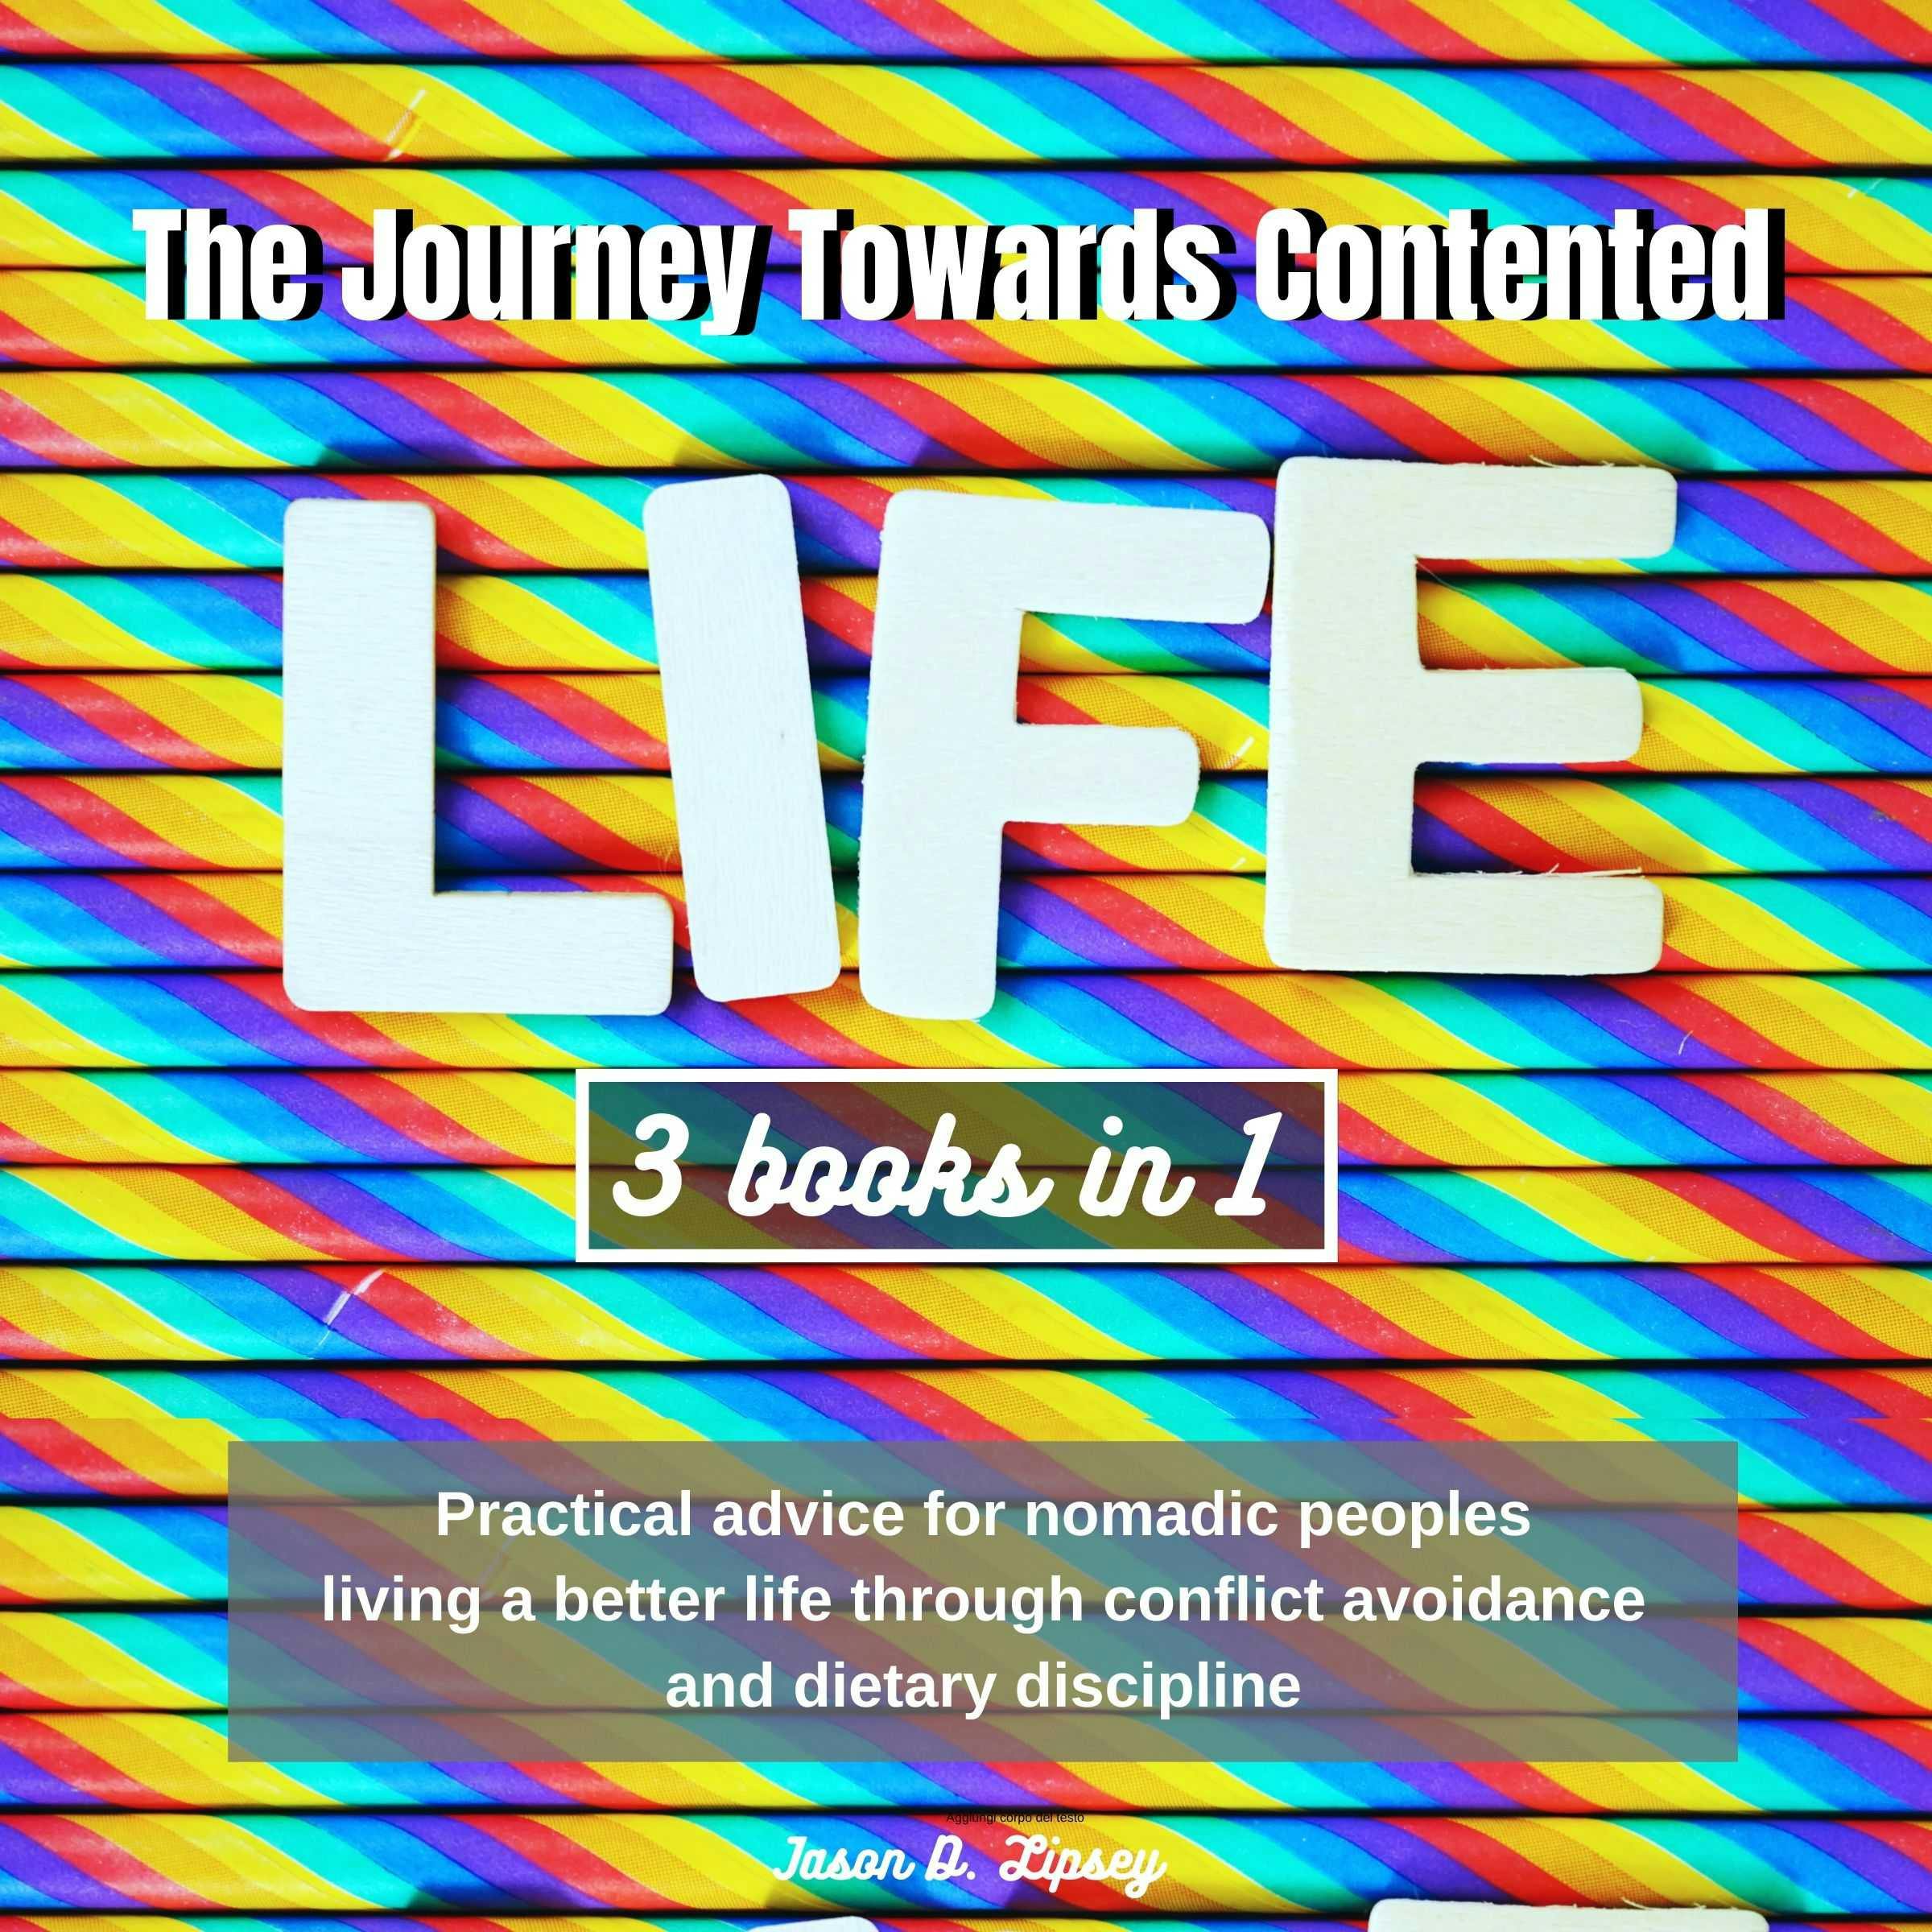 The Journey Towards Contented Life: Practical advice for nomadic peoples living a better life through conflict avoidance and dietary discipline - Jason D. lipsey